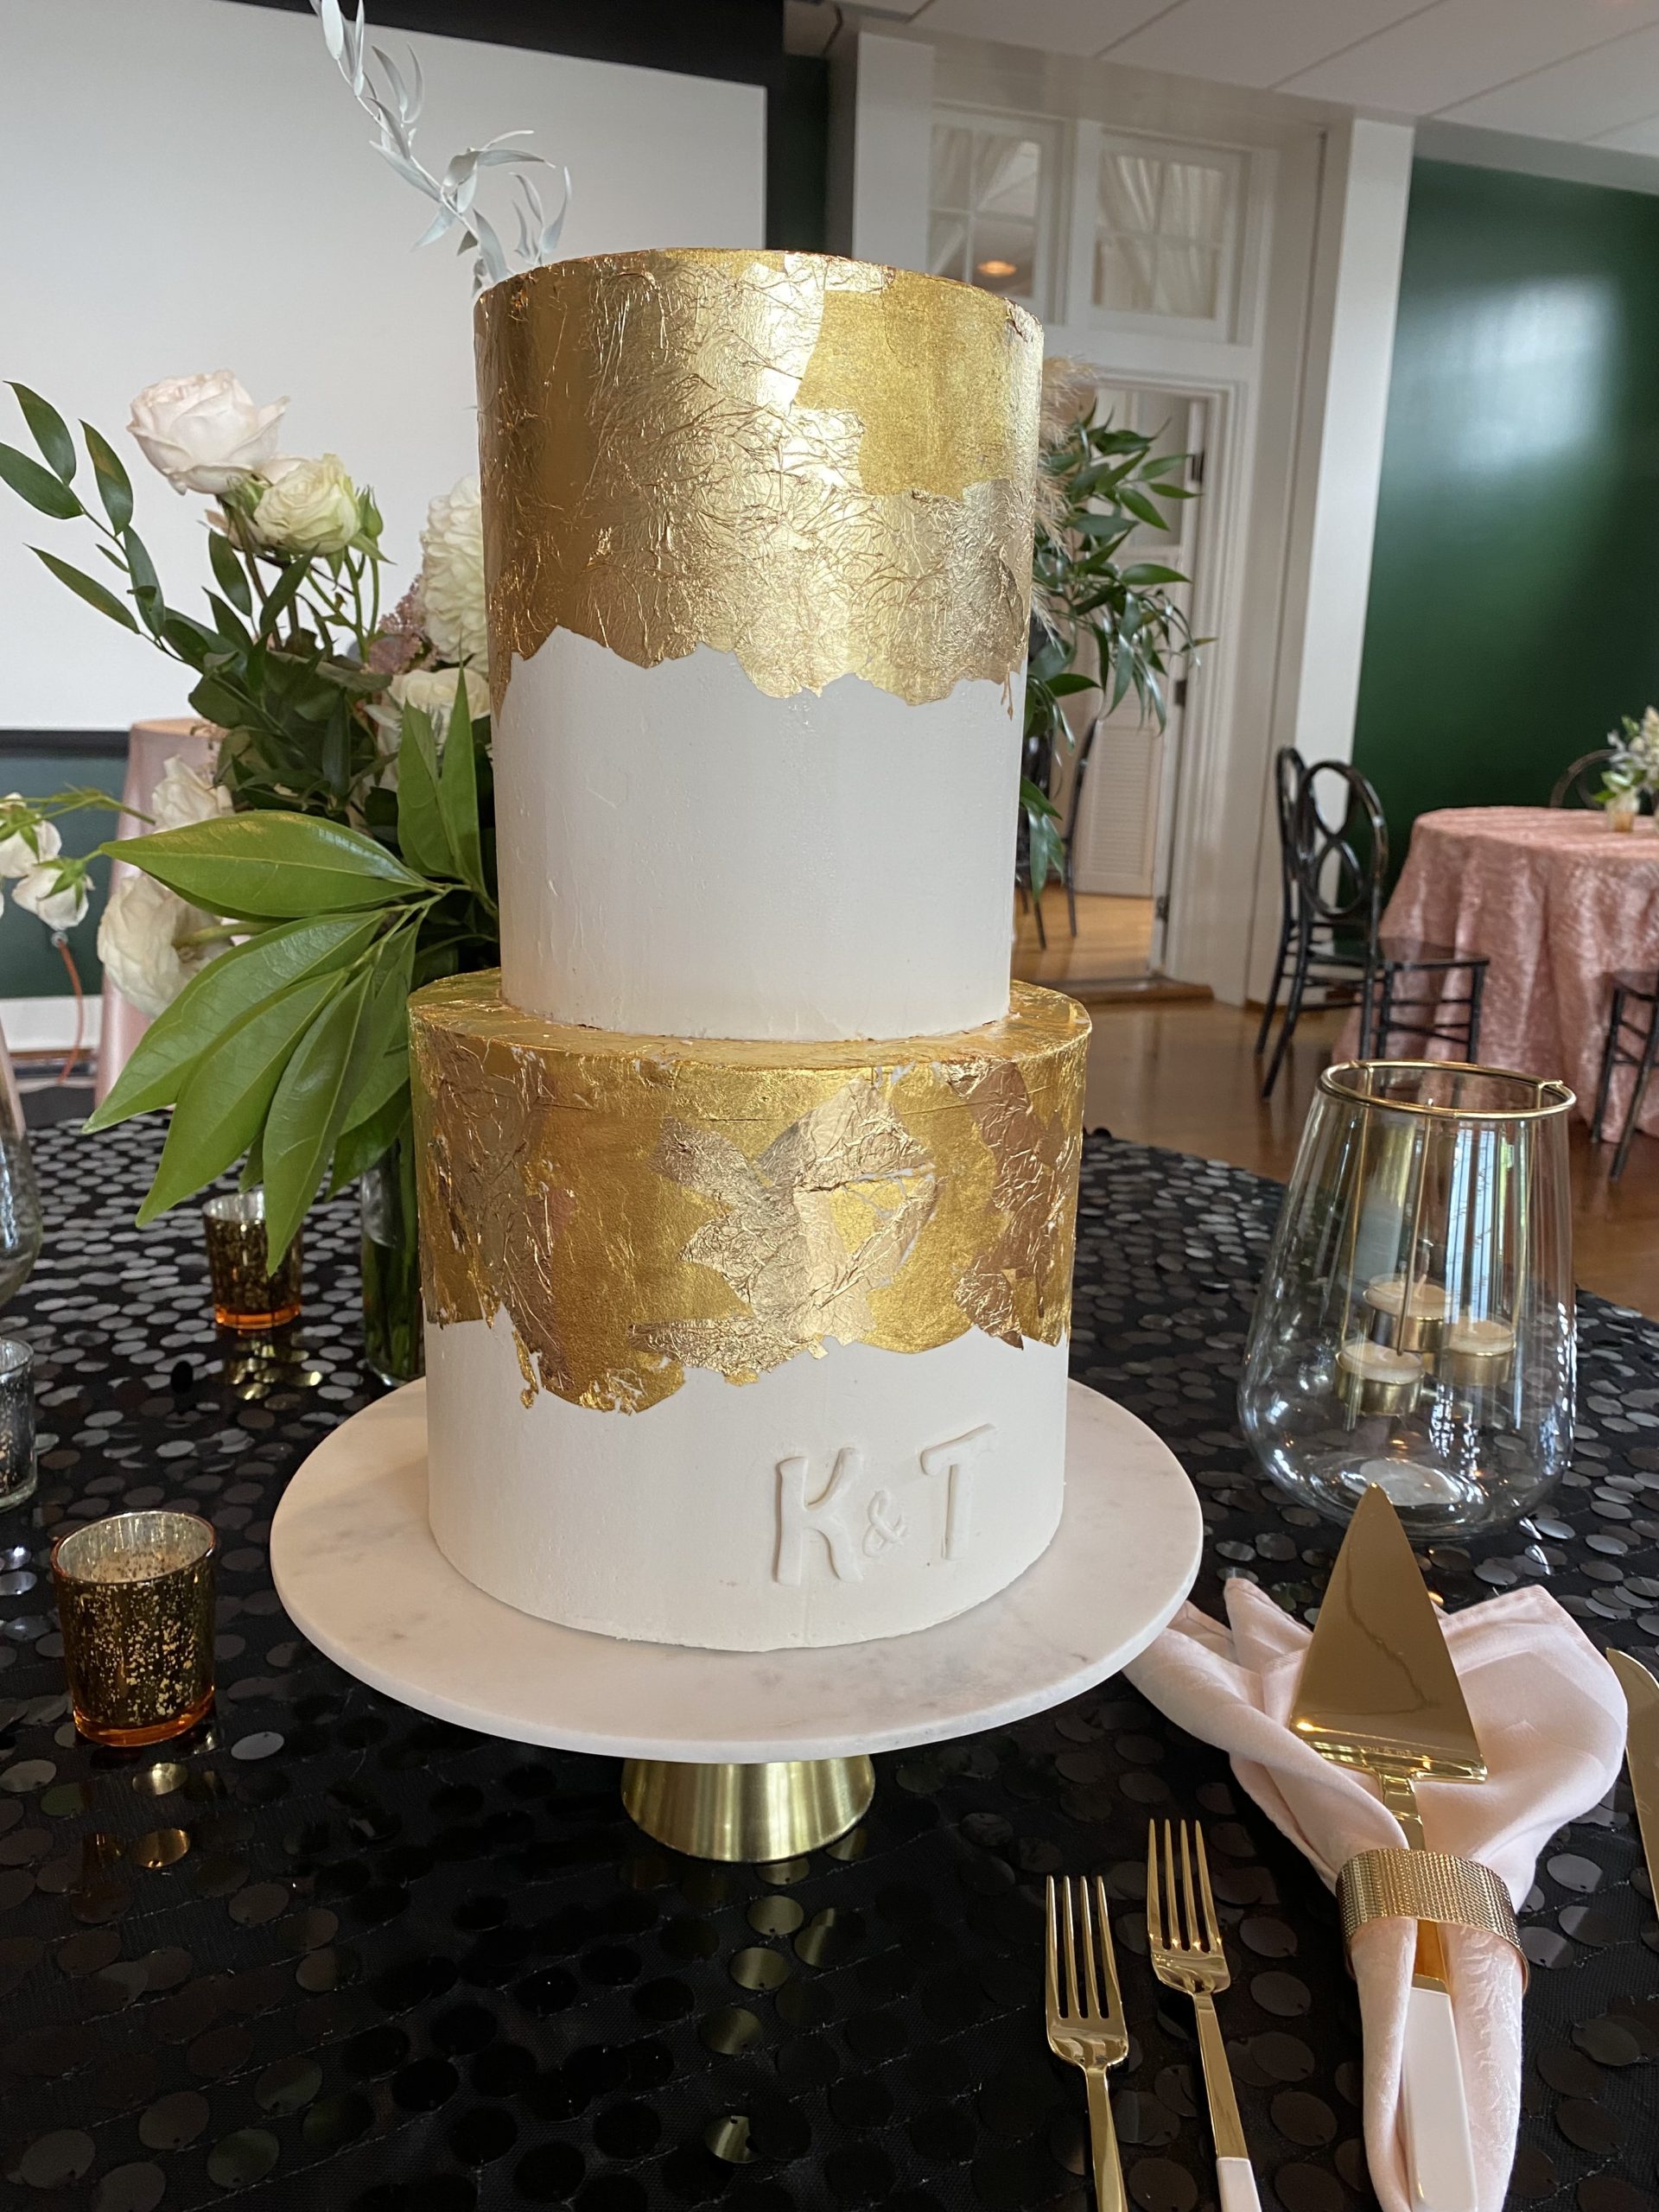 A beautiful 2-tier custom wedding cake with extensive gold leaf from Village Patisserie in Toledo, Ohio